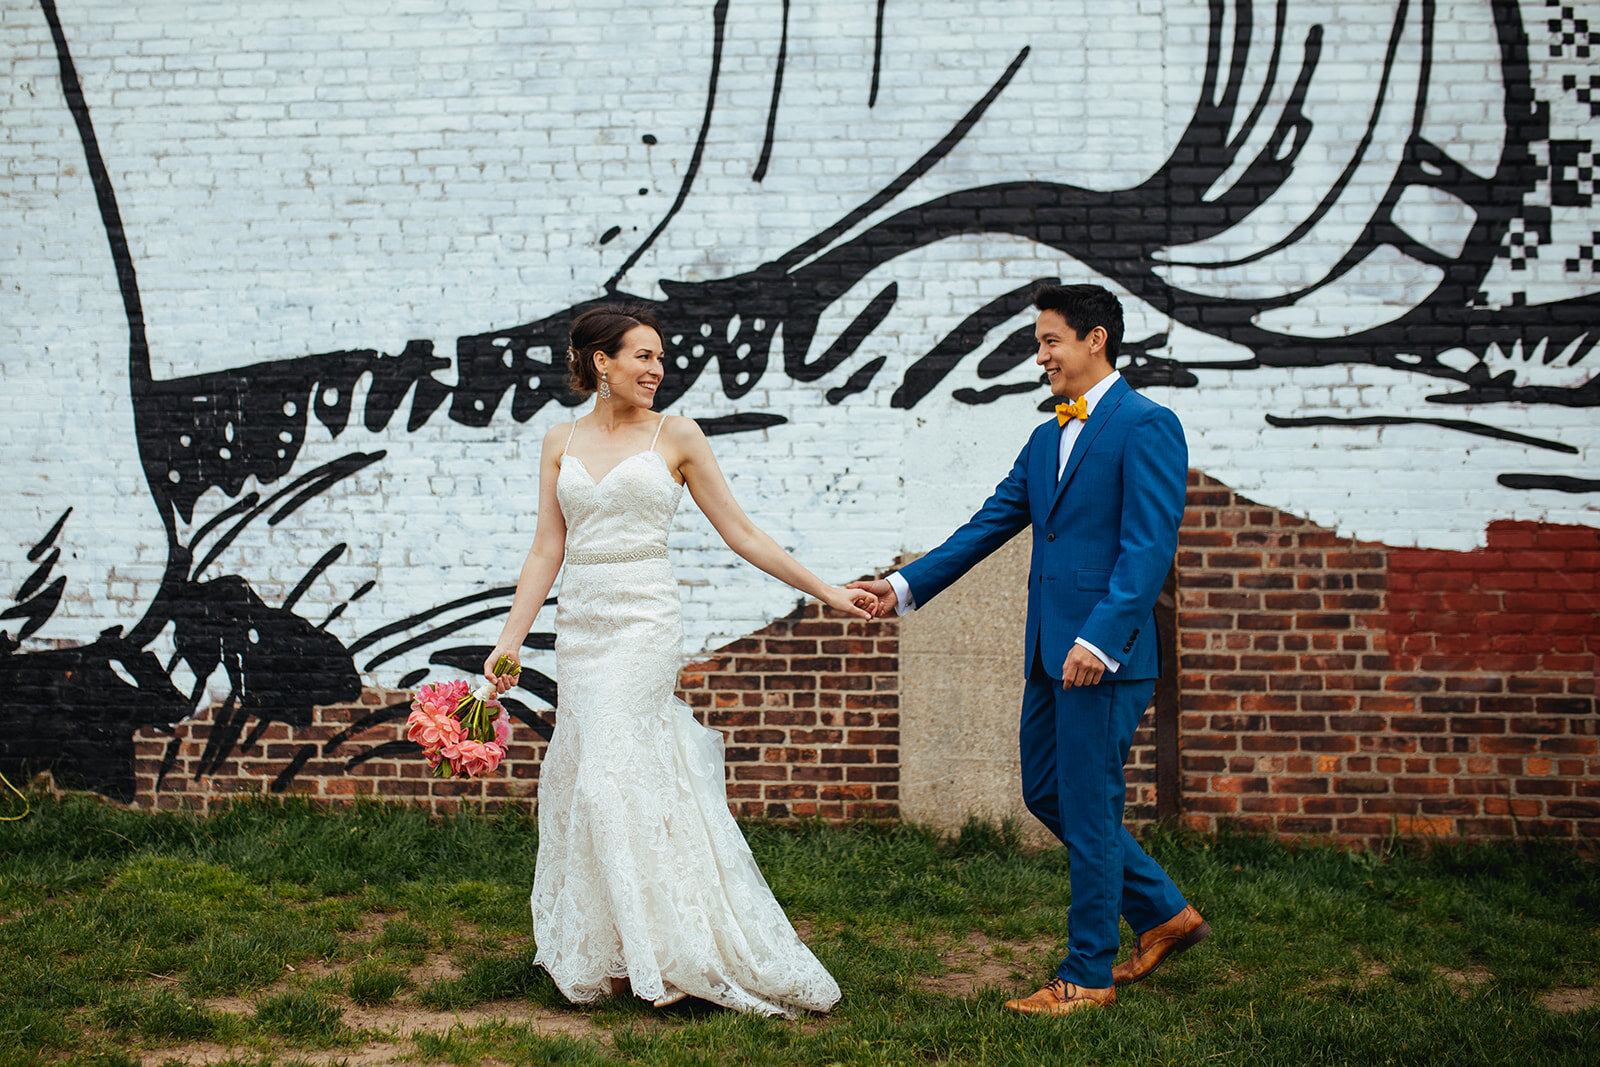 Future spouses holding hands by a mural in Brooklyn NY Shawnee Custalow wedding photography